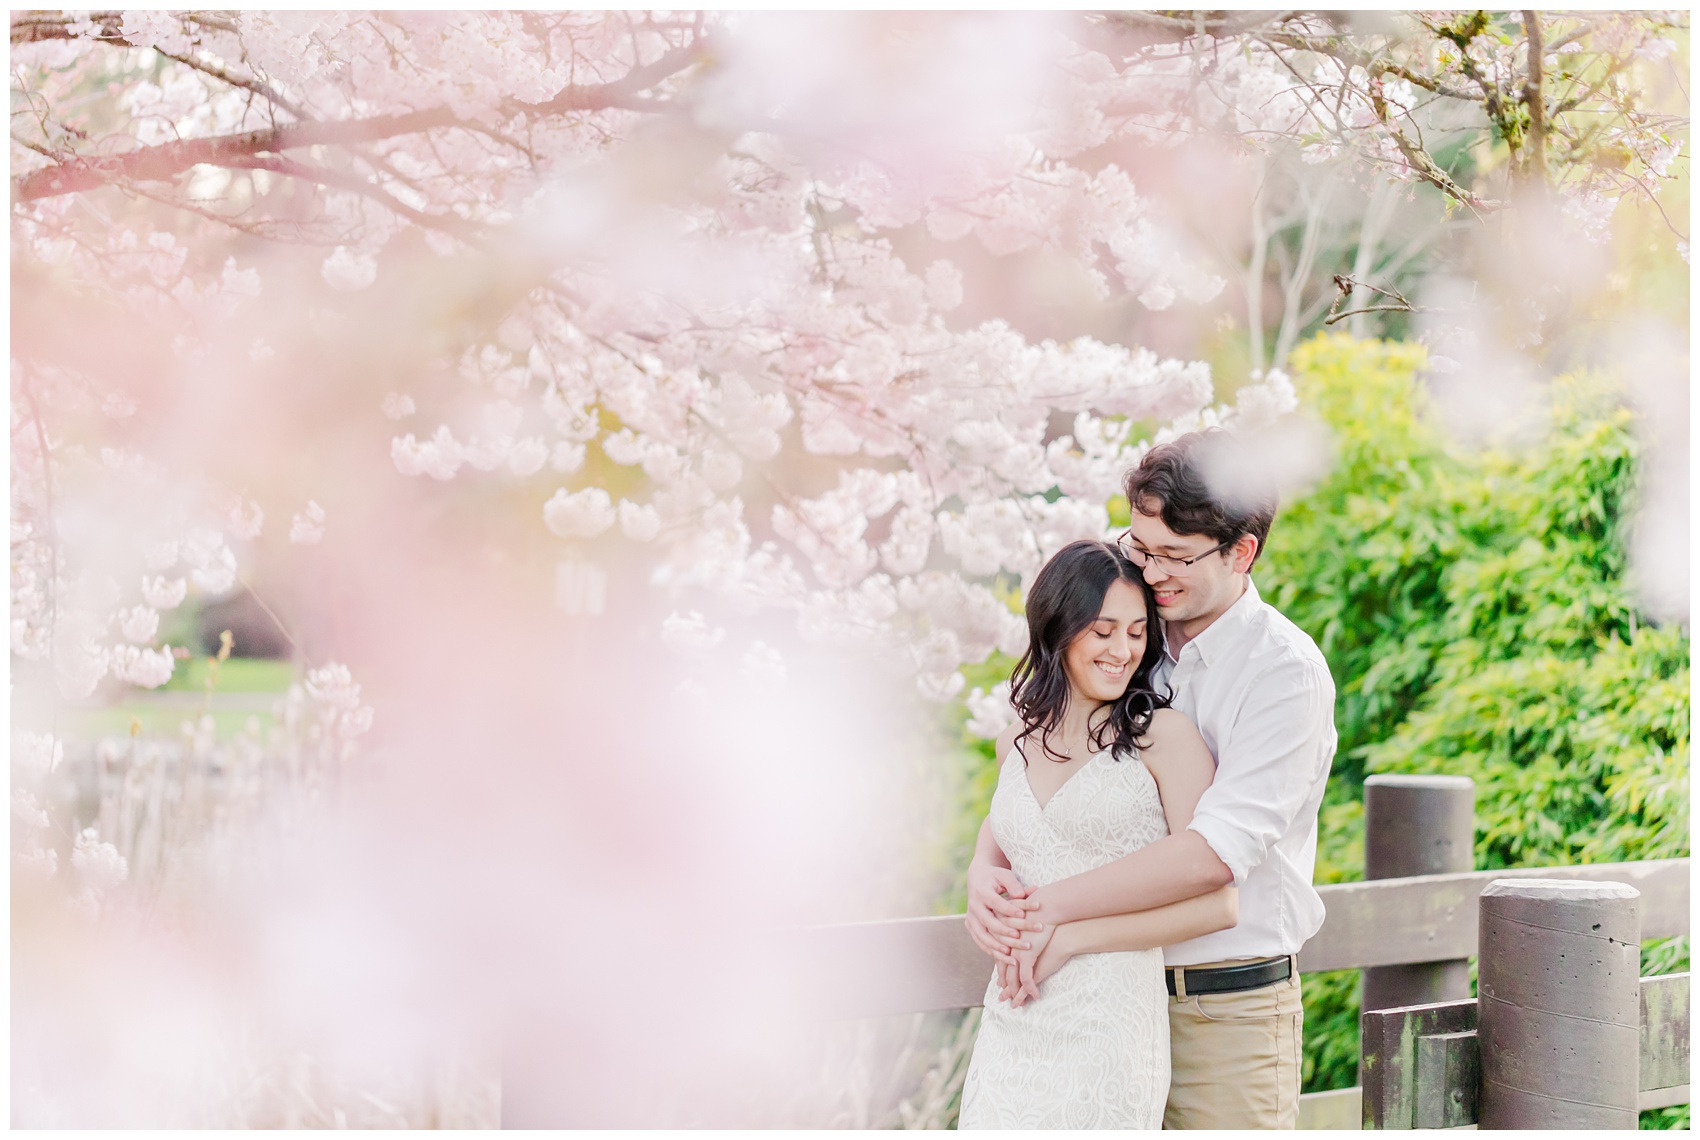 Richmond BC Engagement Photos at Minoru Park with Cherry Blossoms